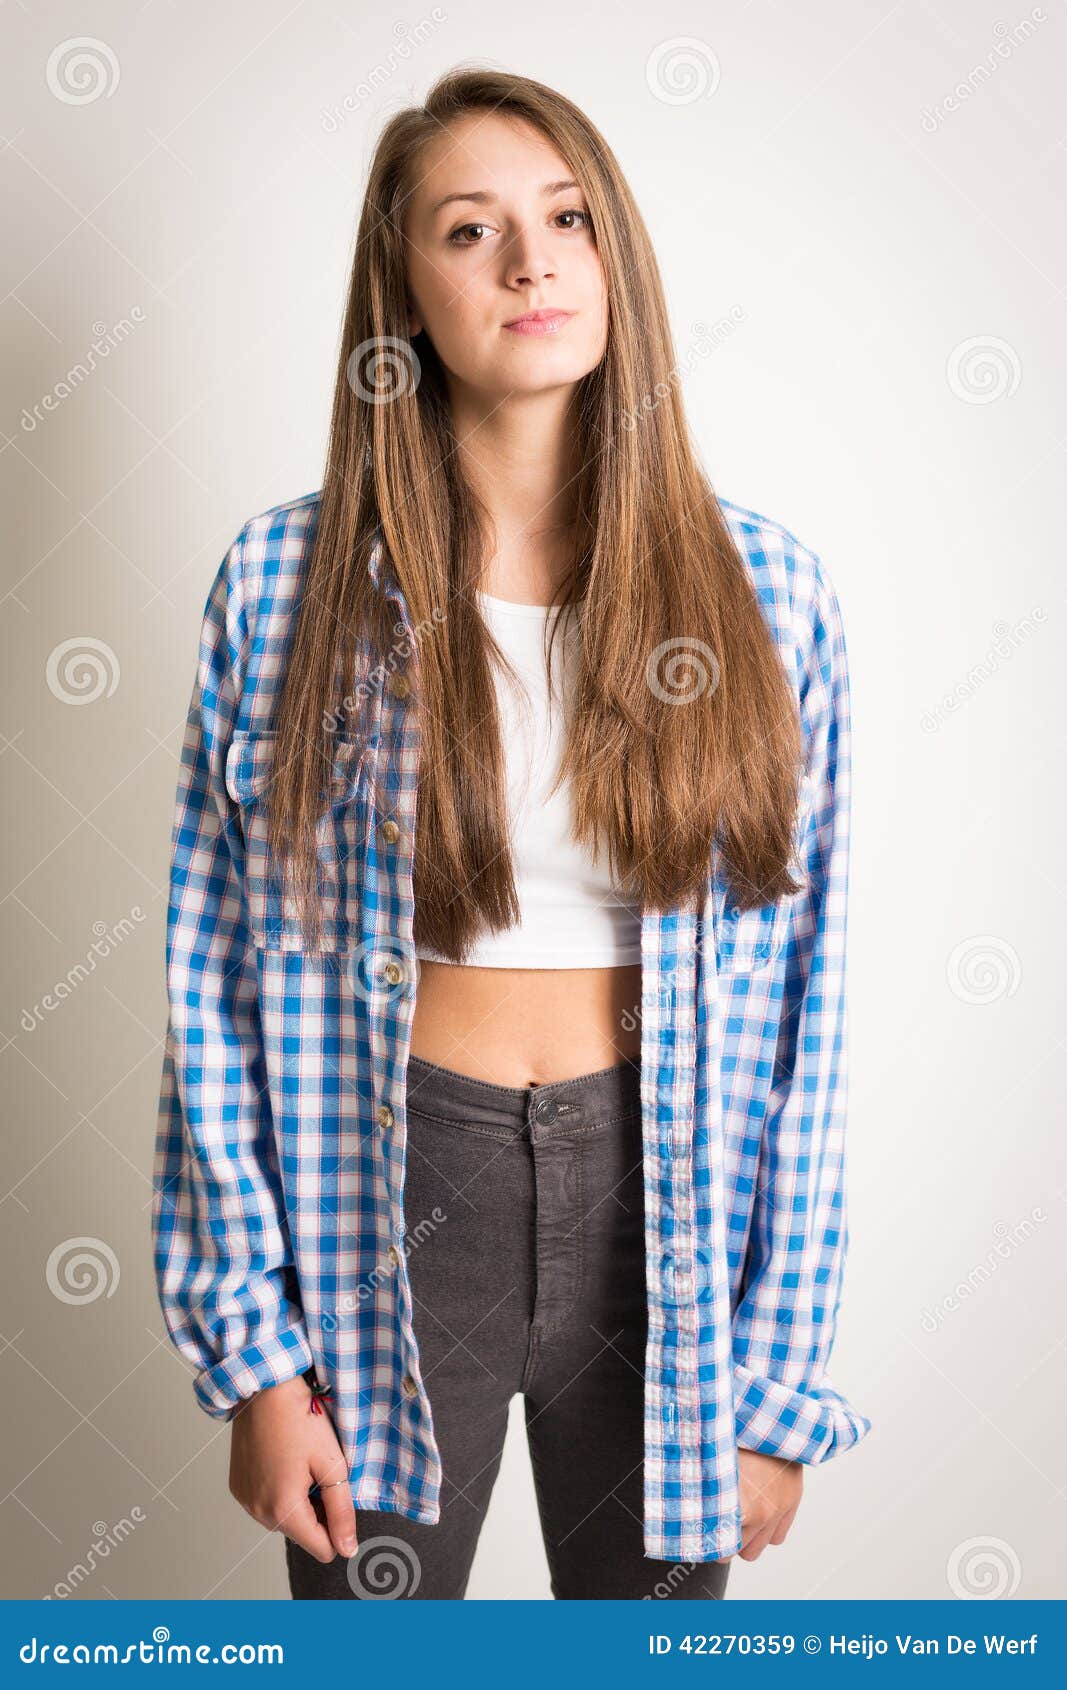 Beautiful Teen Girl In A White Top And Blue Shirt Stock Image